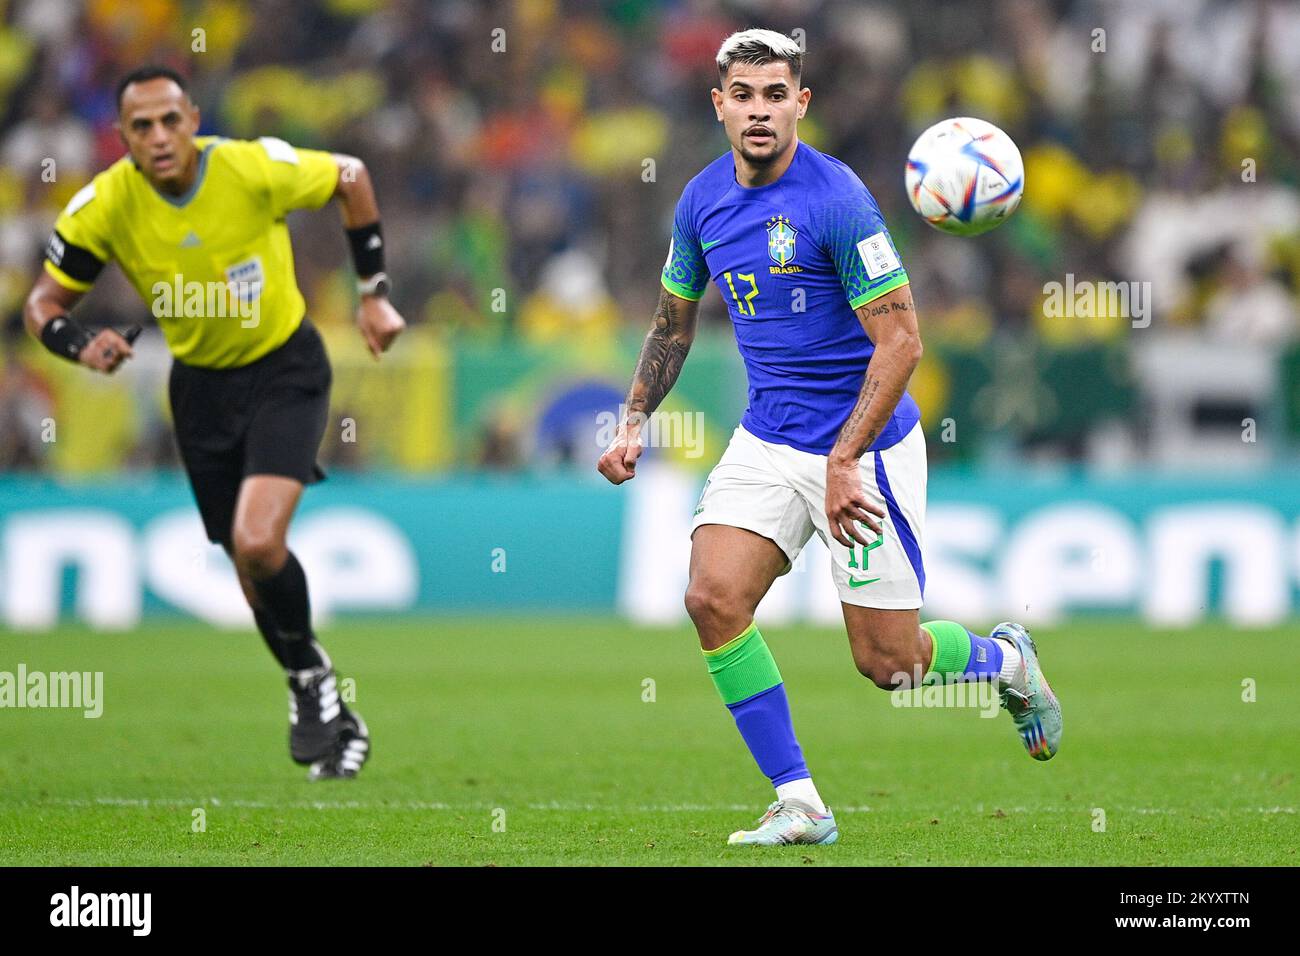 LUSAIL CITY, QATAR - DECEMBER 2: Bruno Guimaraes of Brazil in action during the Group G - FIFA World Cup Qatar 2022 match between Cameroon and Brazil at the Lusail Stadium on December 2, 2022 in Lusail City, Qatar (Photo by Pablo Morano/BSR Agency) Stock Photo